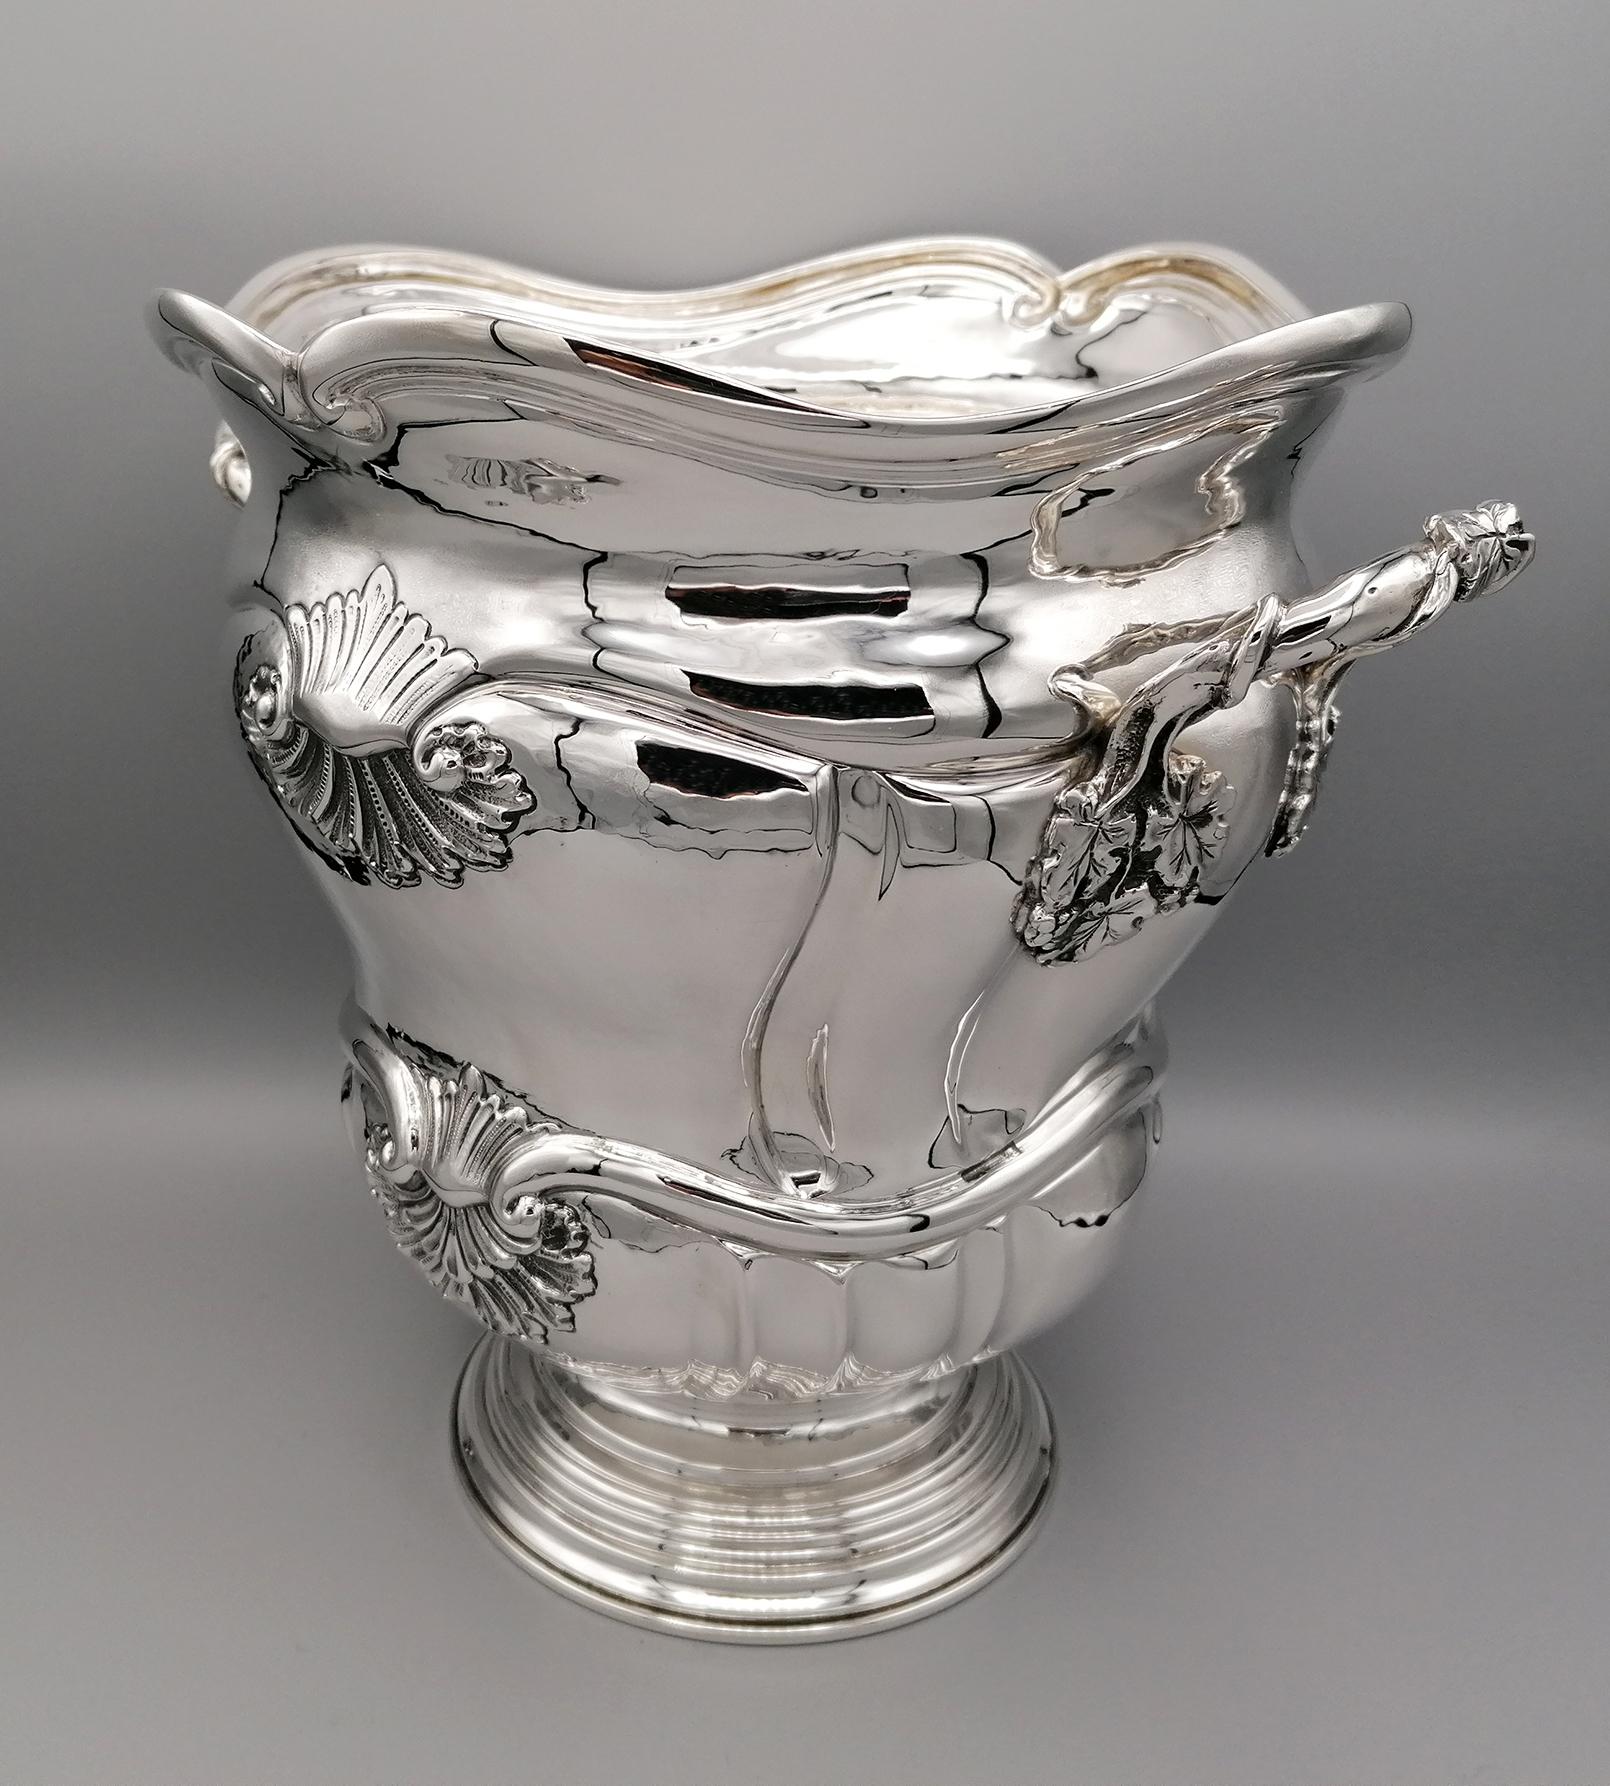 Gorgeous handmade sterling silver champagne bucket.
The body is shaped, embossed and chiseled completely by hand.
Four shells of two different sizes, typical of the Baroque style, have been embossed and chiseled in a symmetrical way.
Two large